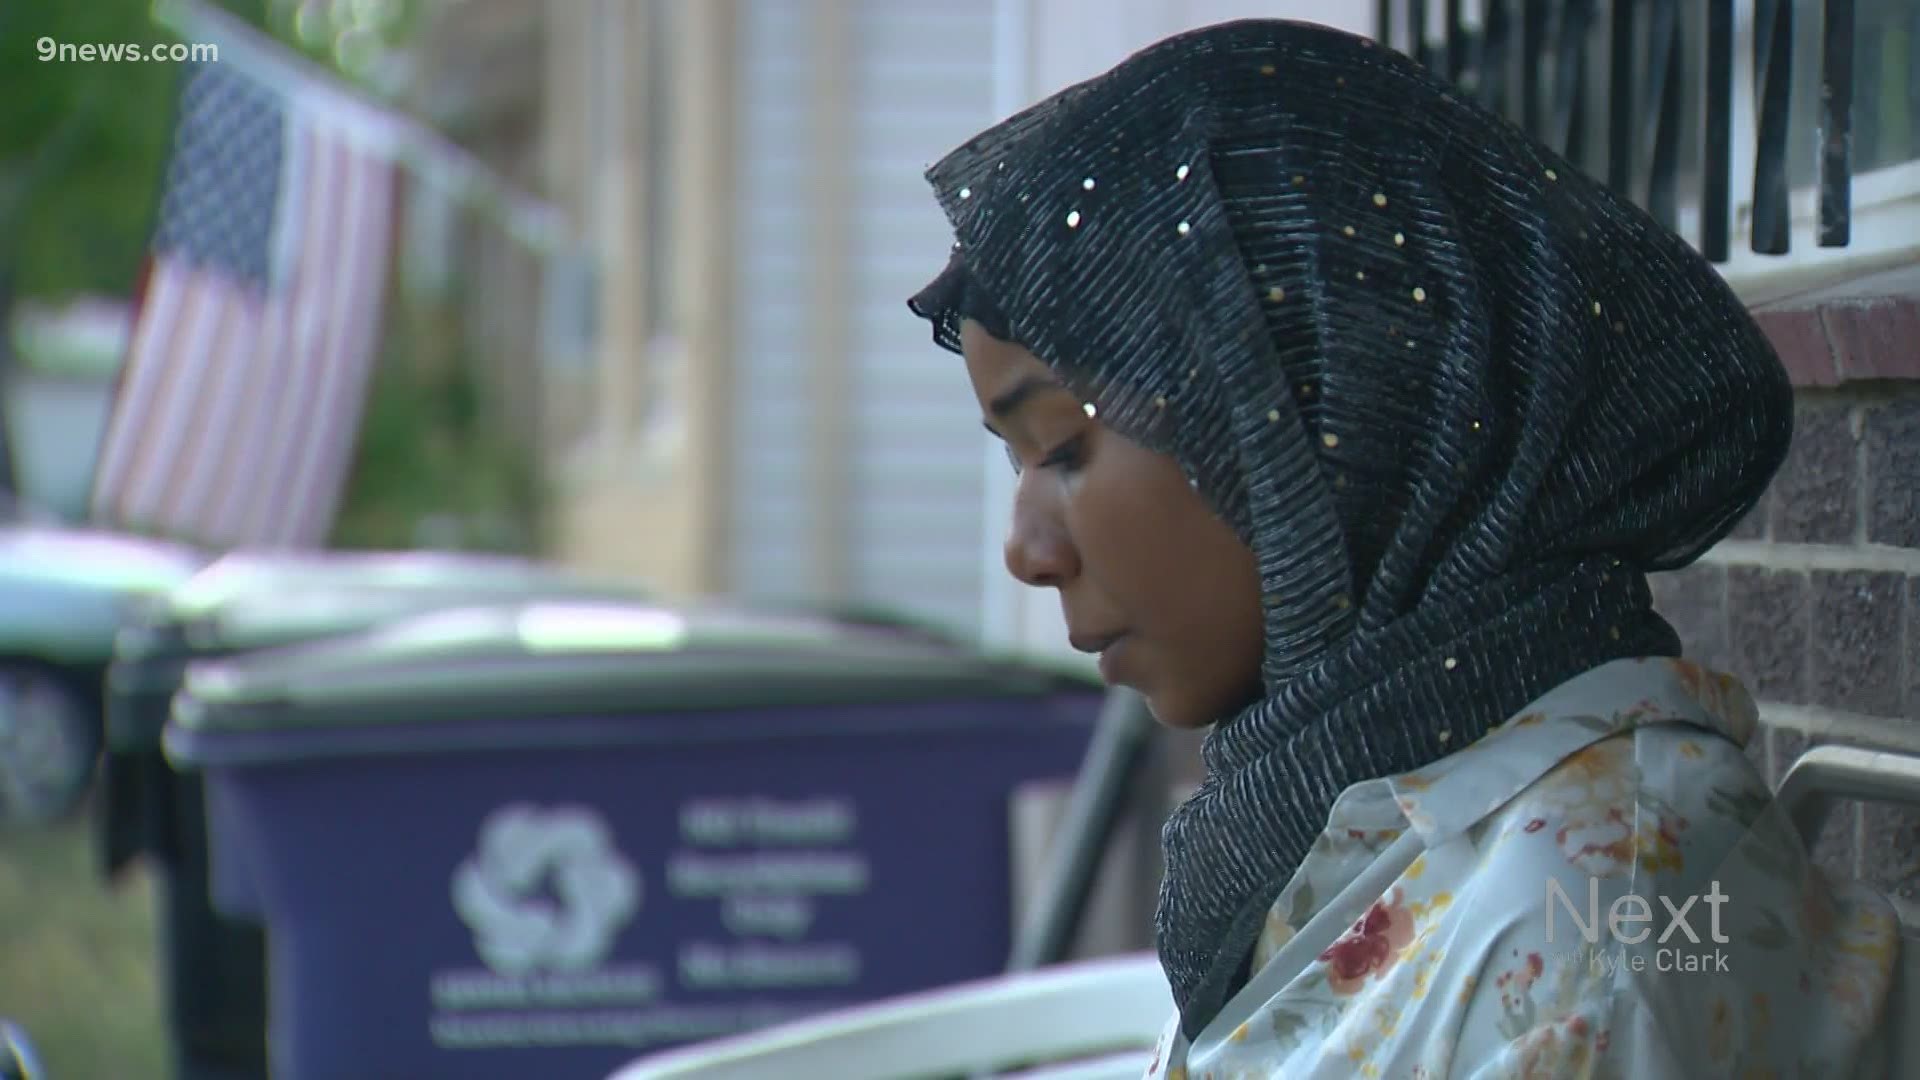 Yusura Ali moved to Denver from Somalia as a child and graduated as valedictorian from Noel Community Arts. She wasn't able to give her speech because of COVID-19.